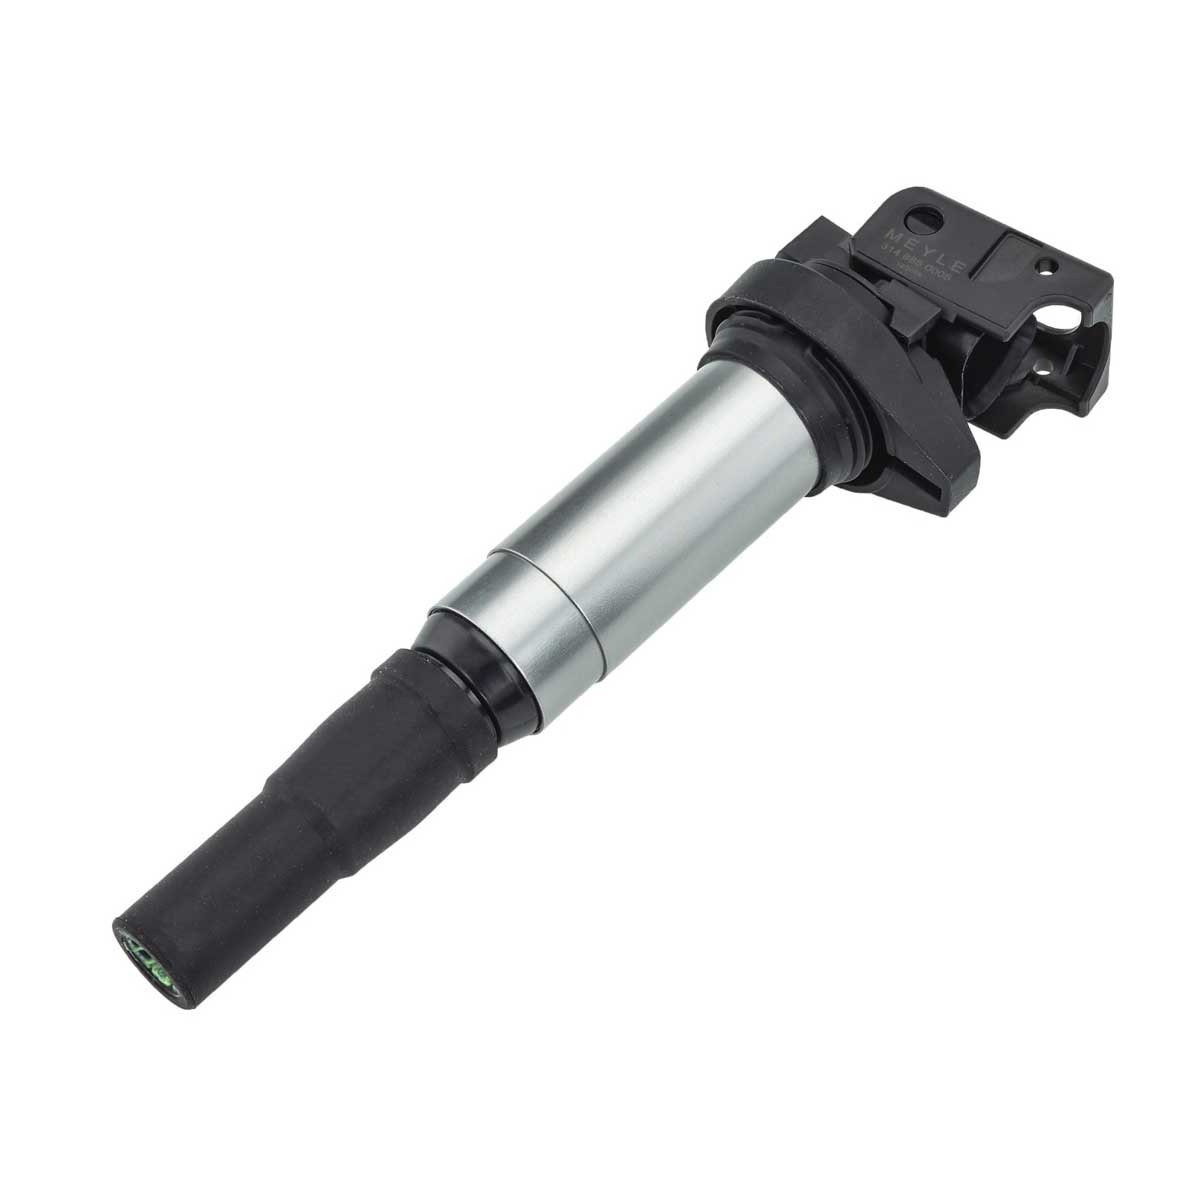 MIC0120 MEYLE 3148850005 Ignition coil 1213 0495 289